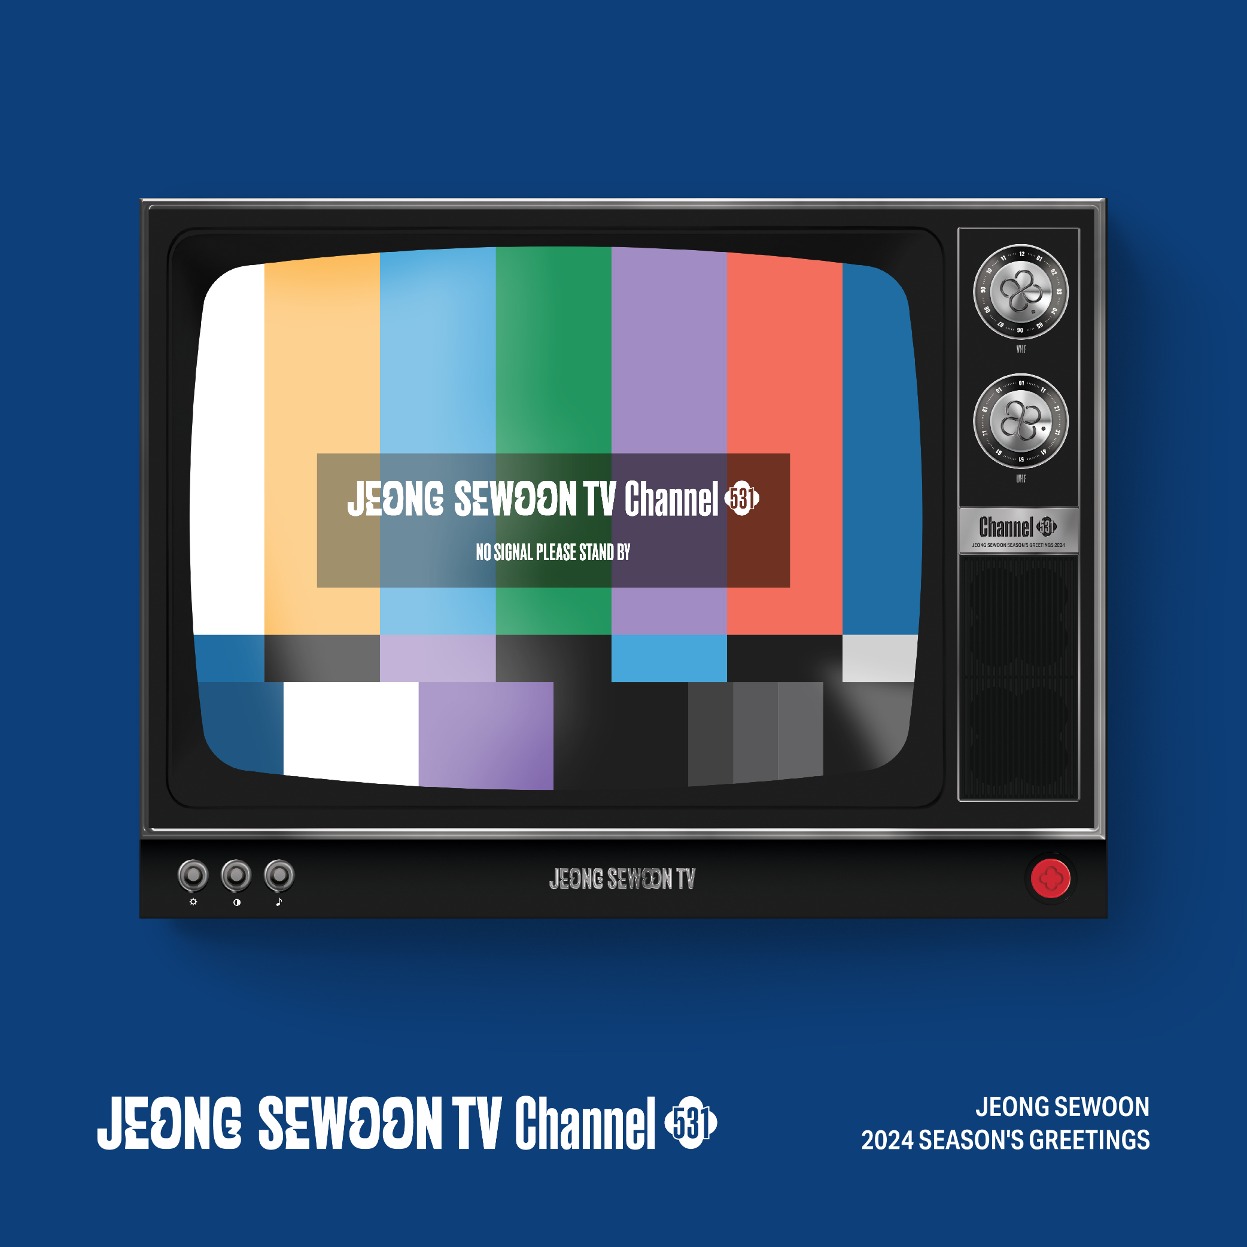 [JEONG SEWOON] [JEONG SEWOON TV-Channel 531]